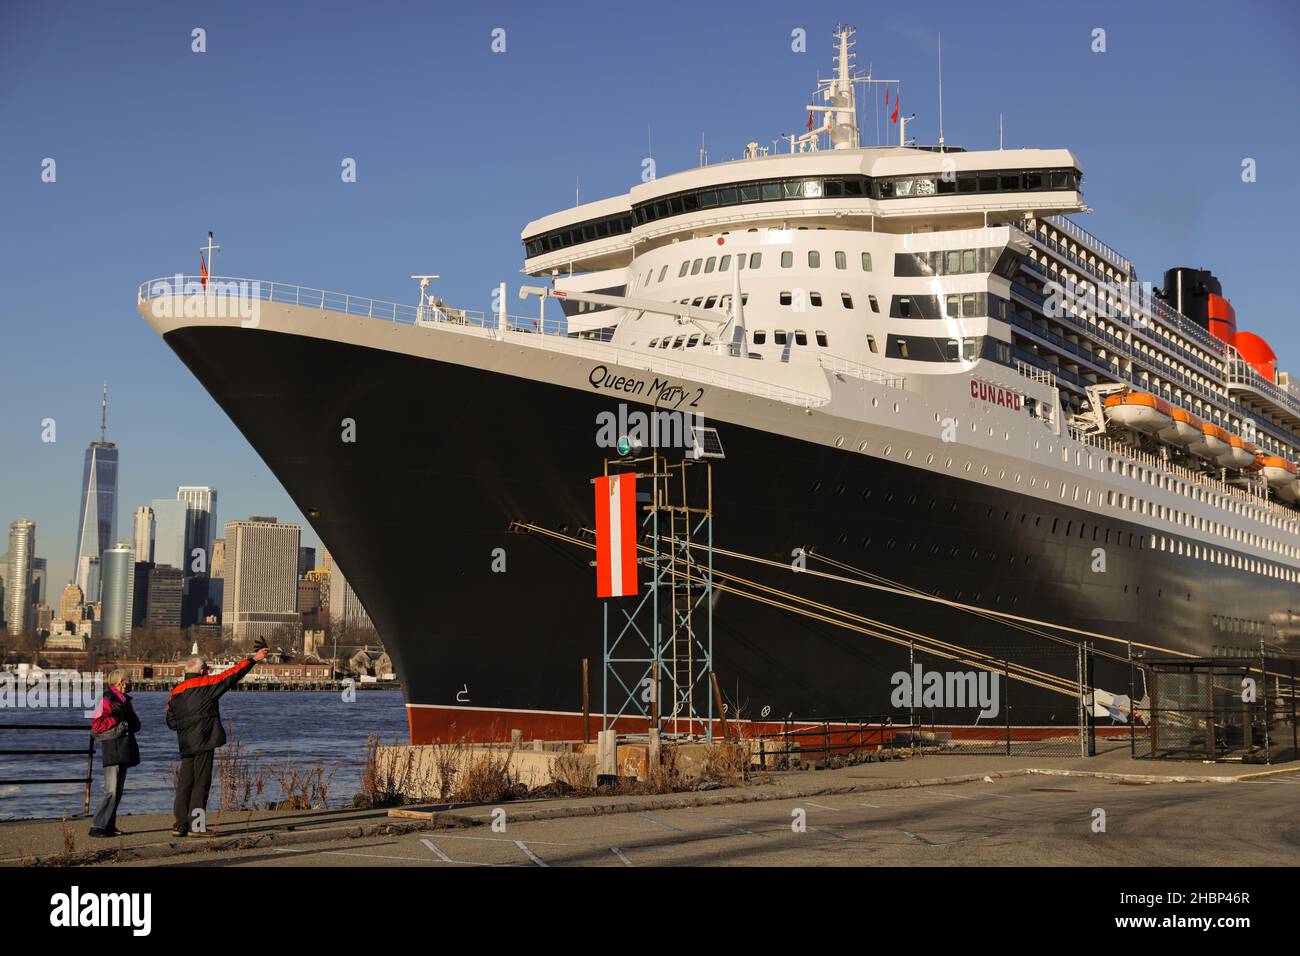 People look toward the Queen Mary 2 cruise ship by Cunard Line, owned by Carnival Corporation & plc. as it sits docked at Brooklyn Cruise Terminal in Brooklyn, New York City, U.S., December 20, 2021. REUTERS/Andrew Kelly Stock Photo